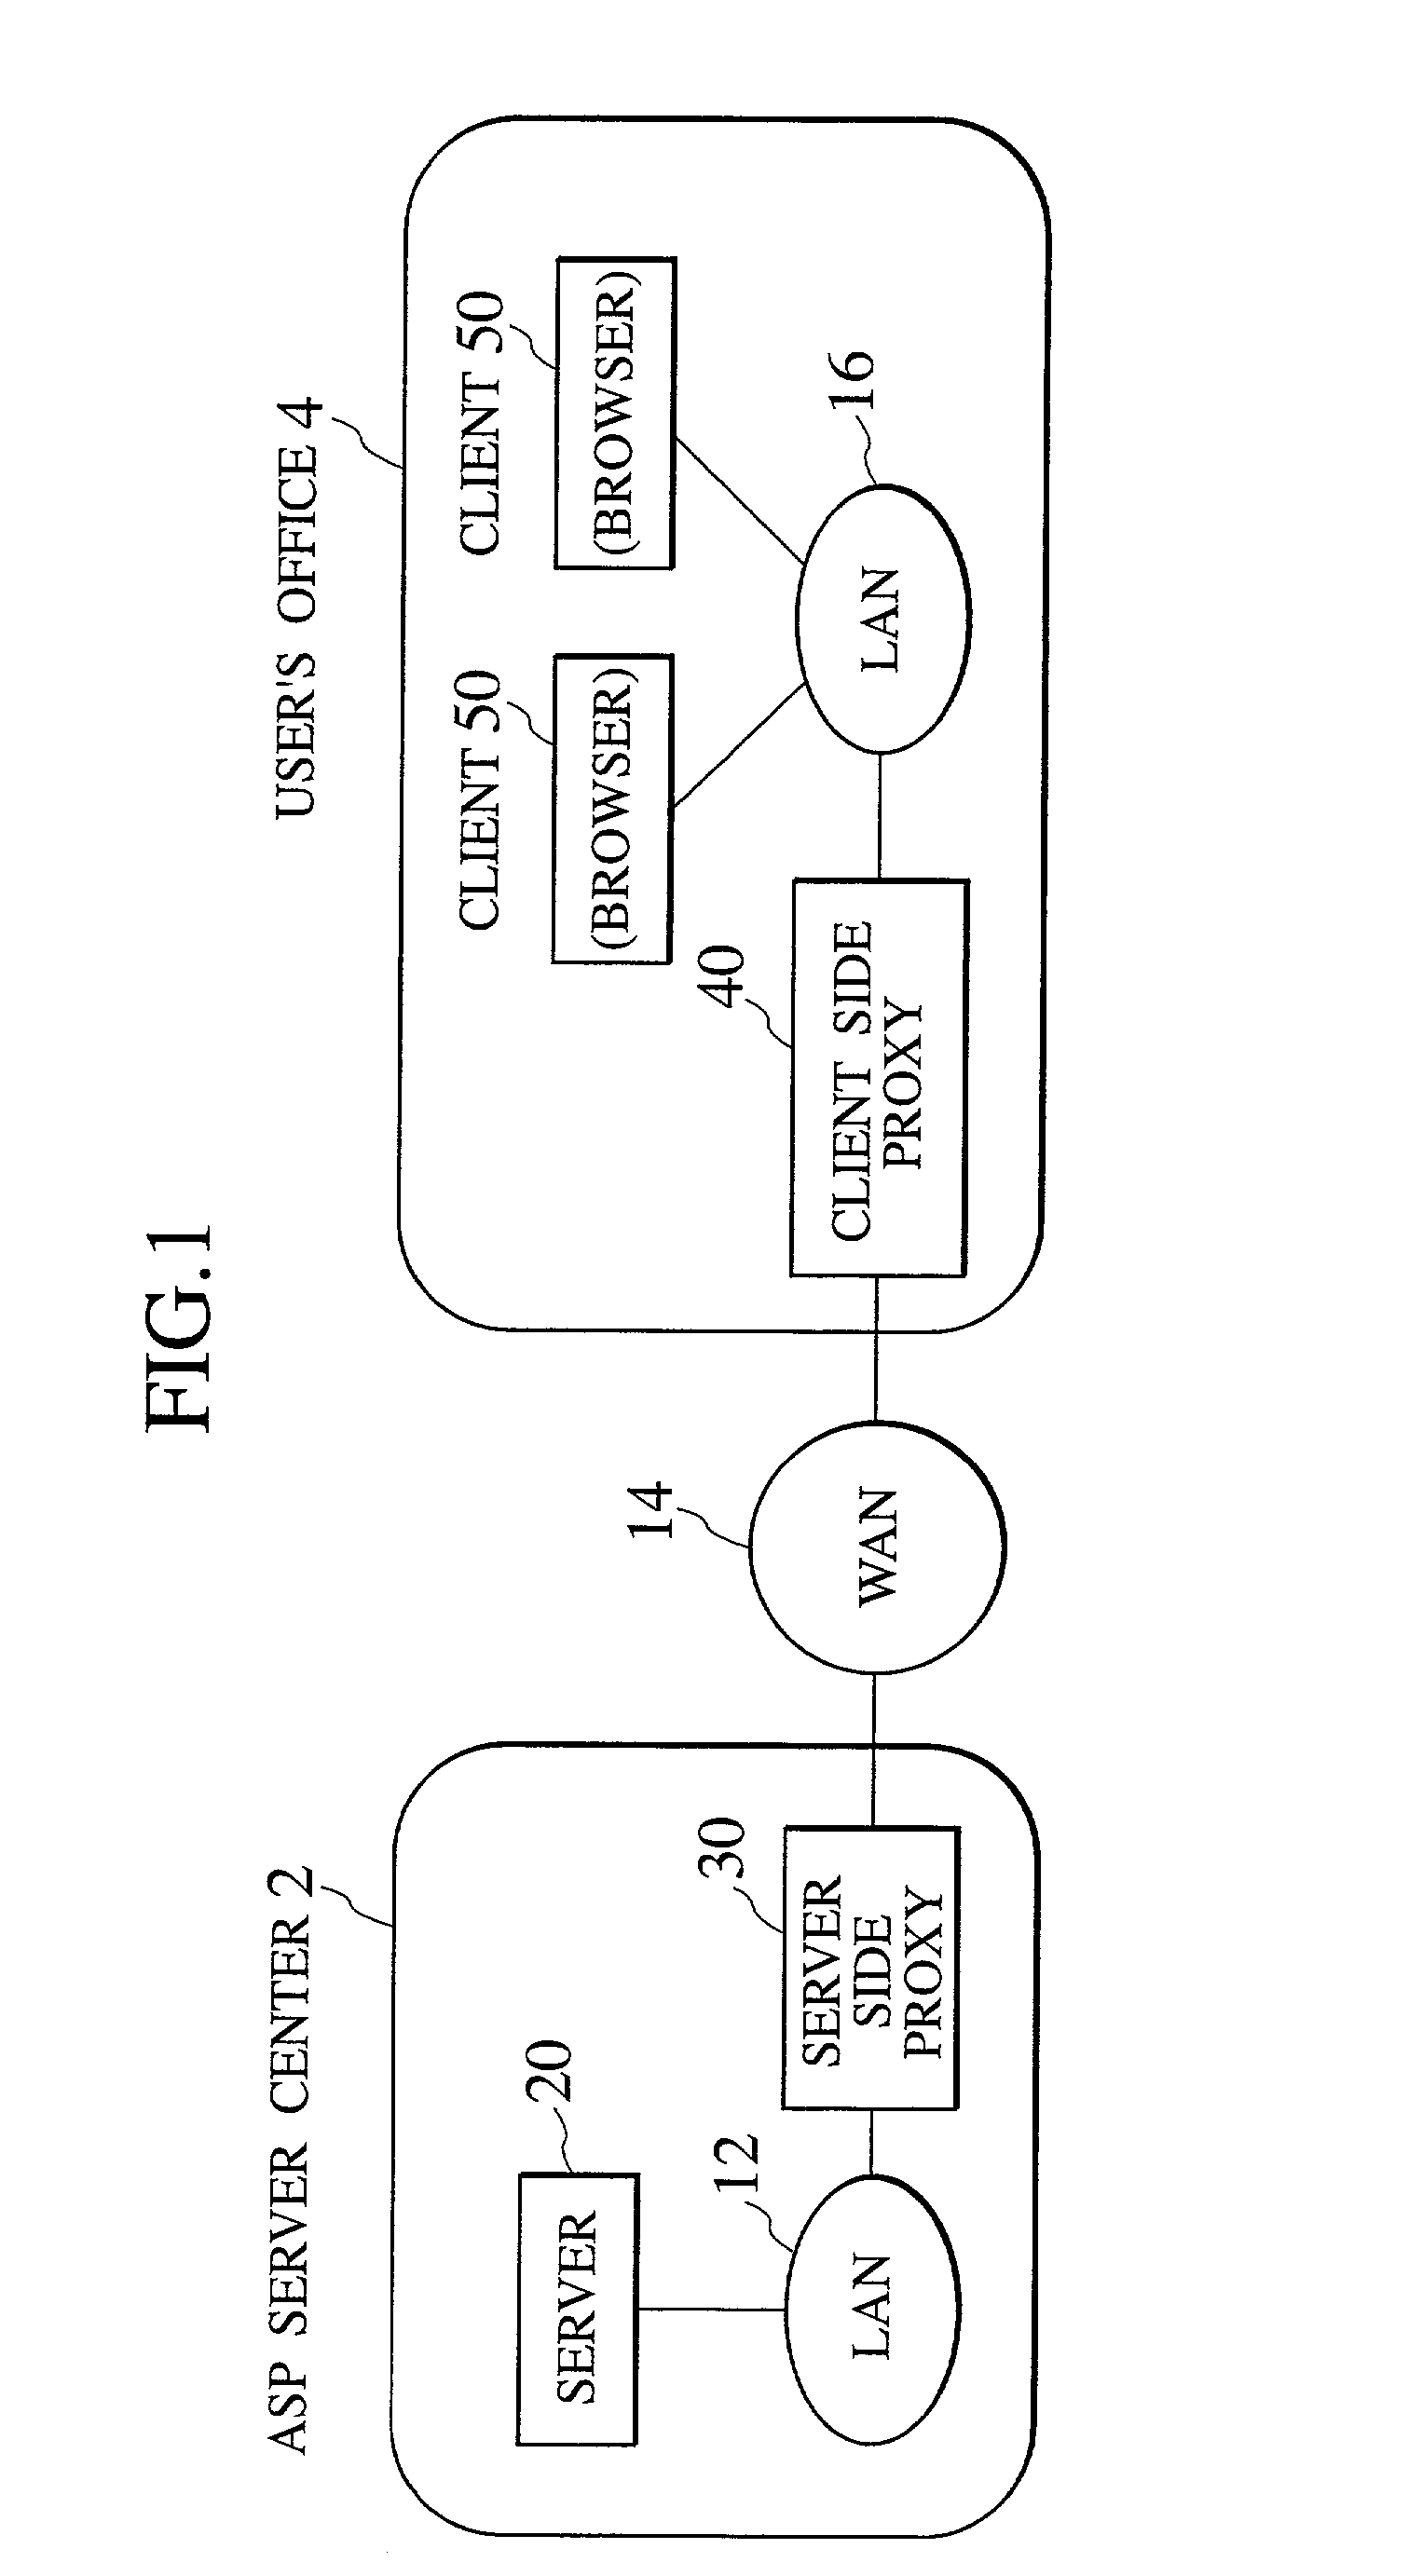 Data transfer scheme using caching technique for reducing network load